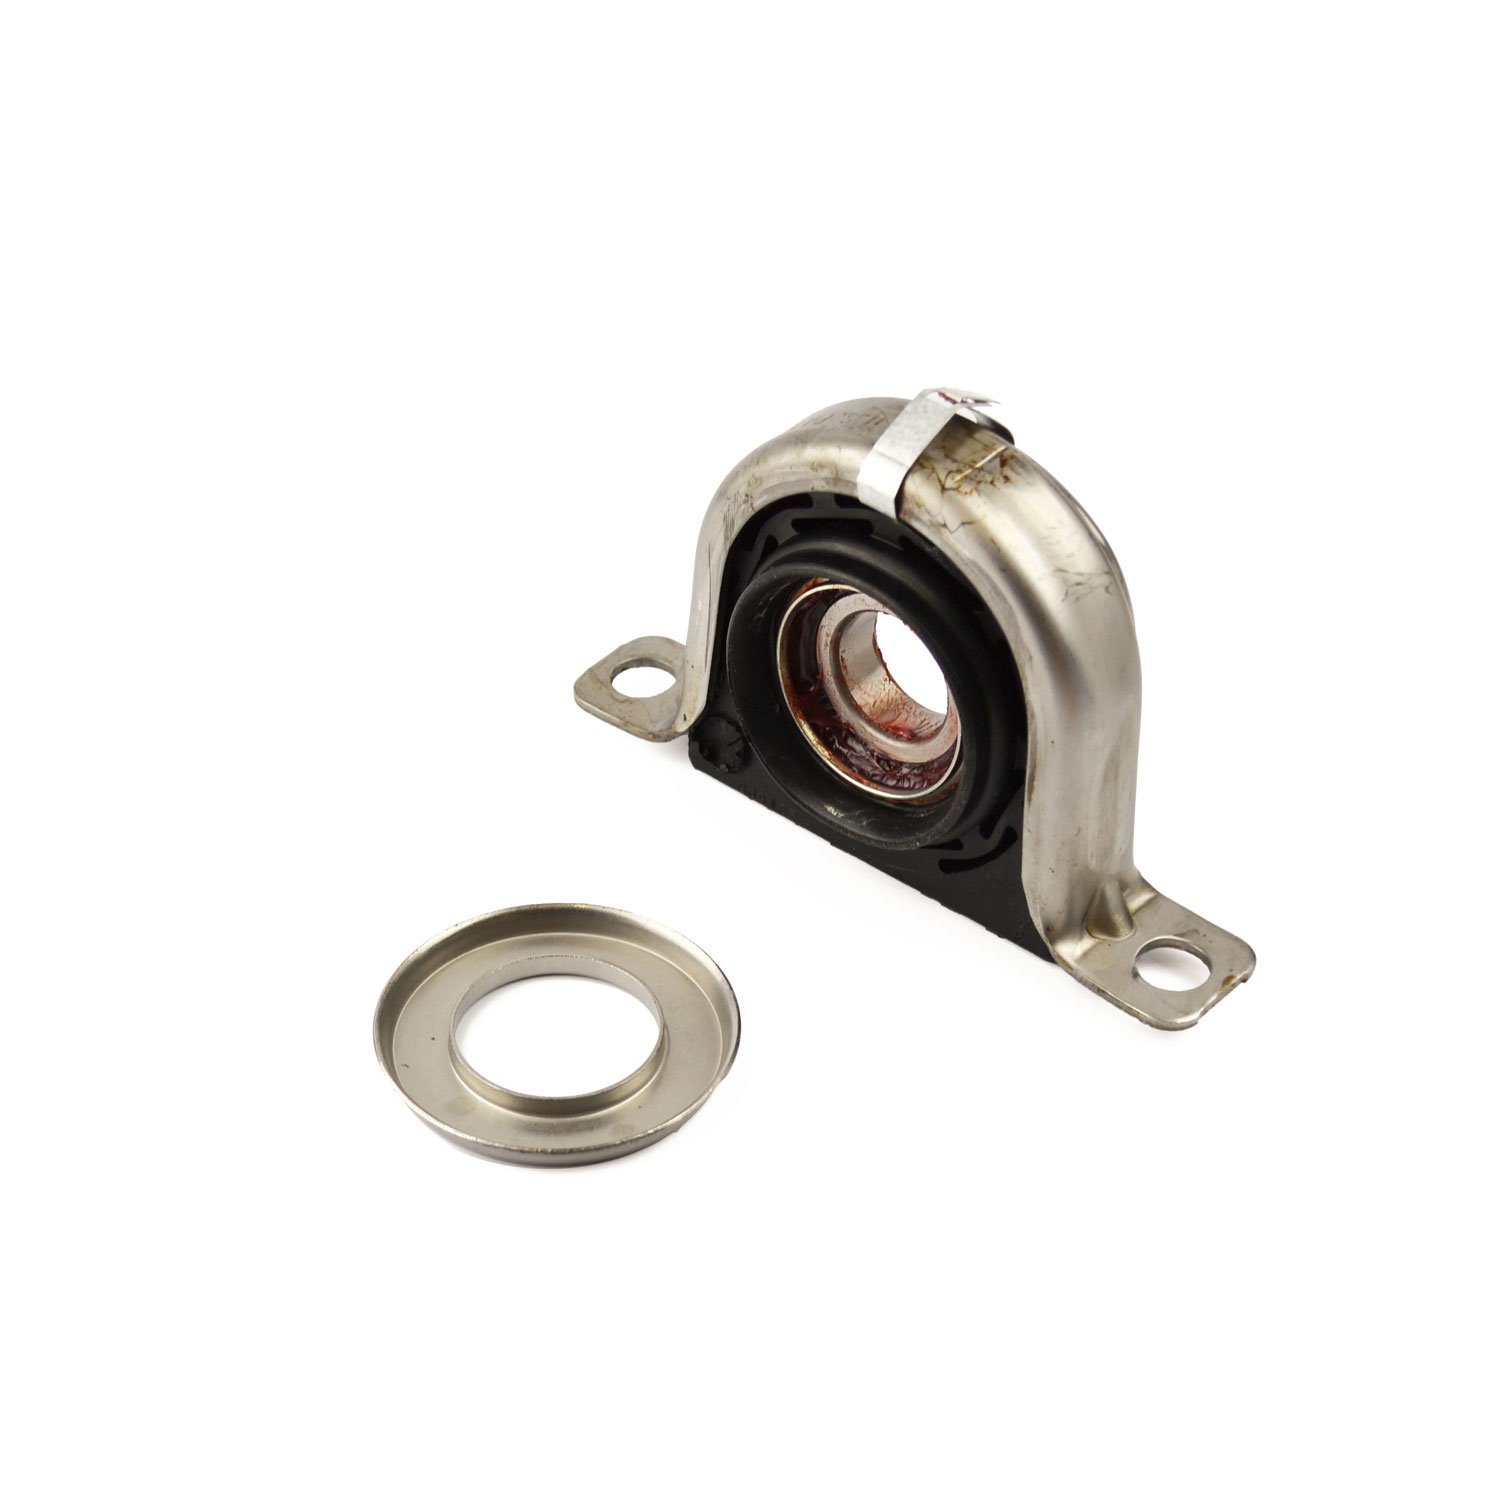 Center Support Bearing ID: 1.181"